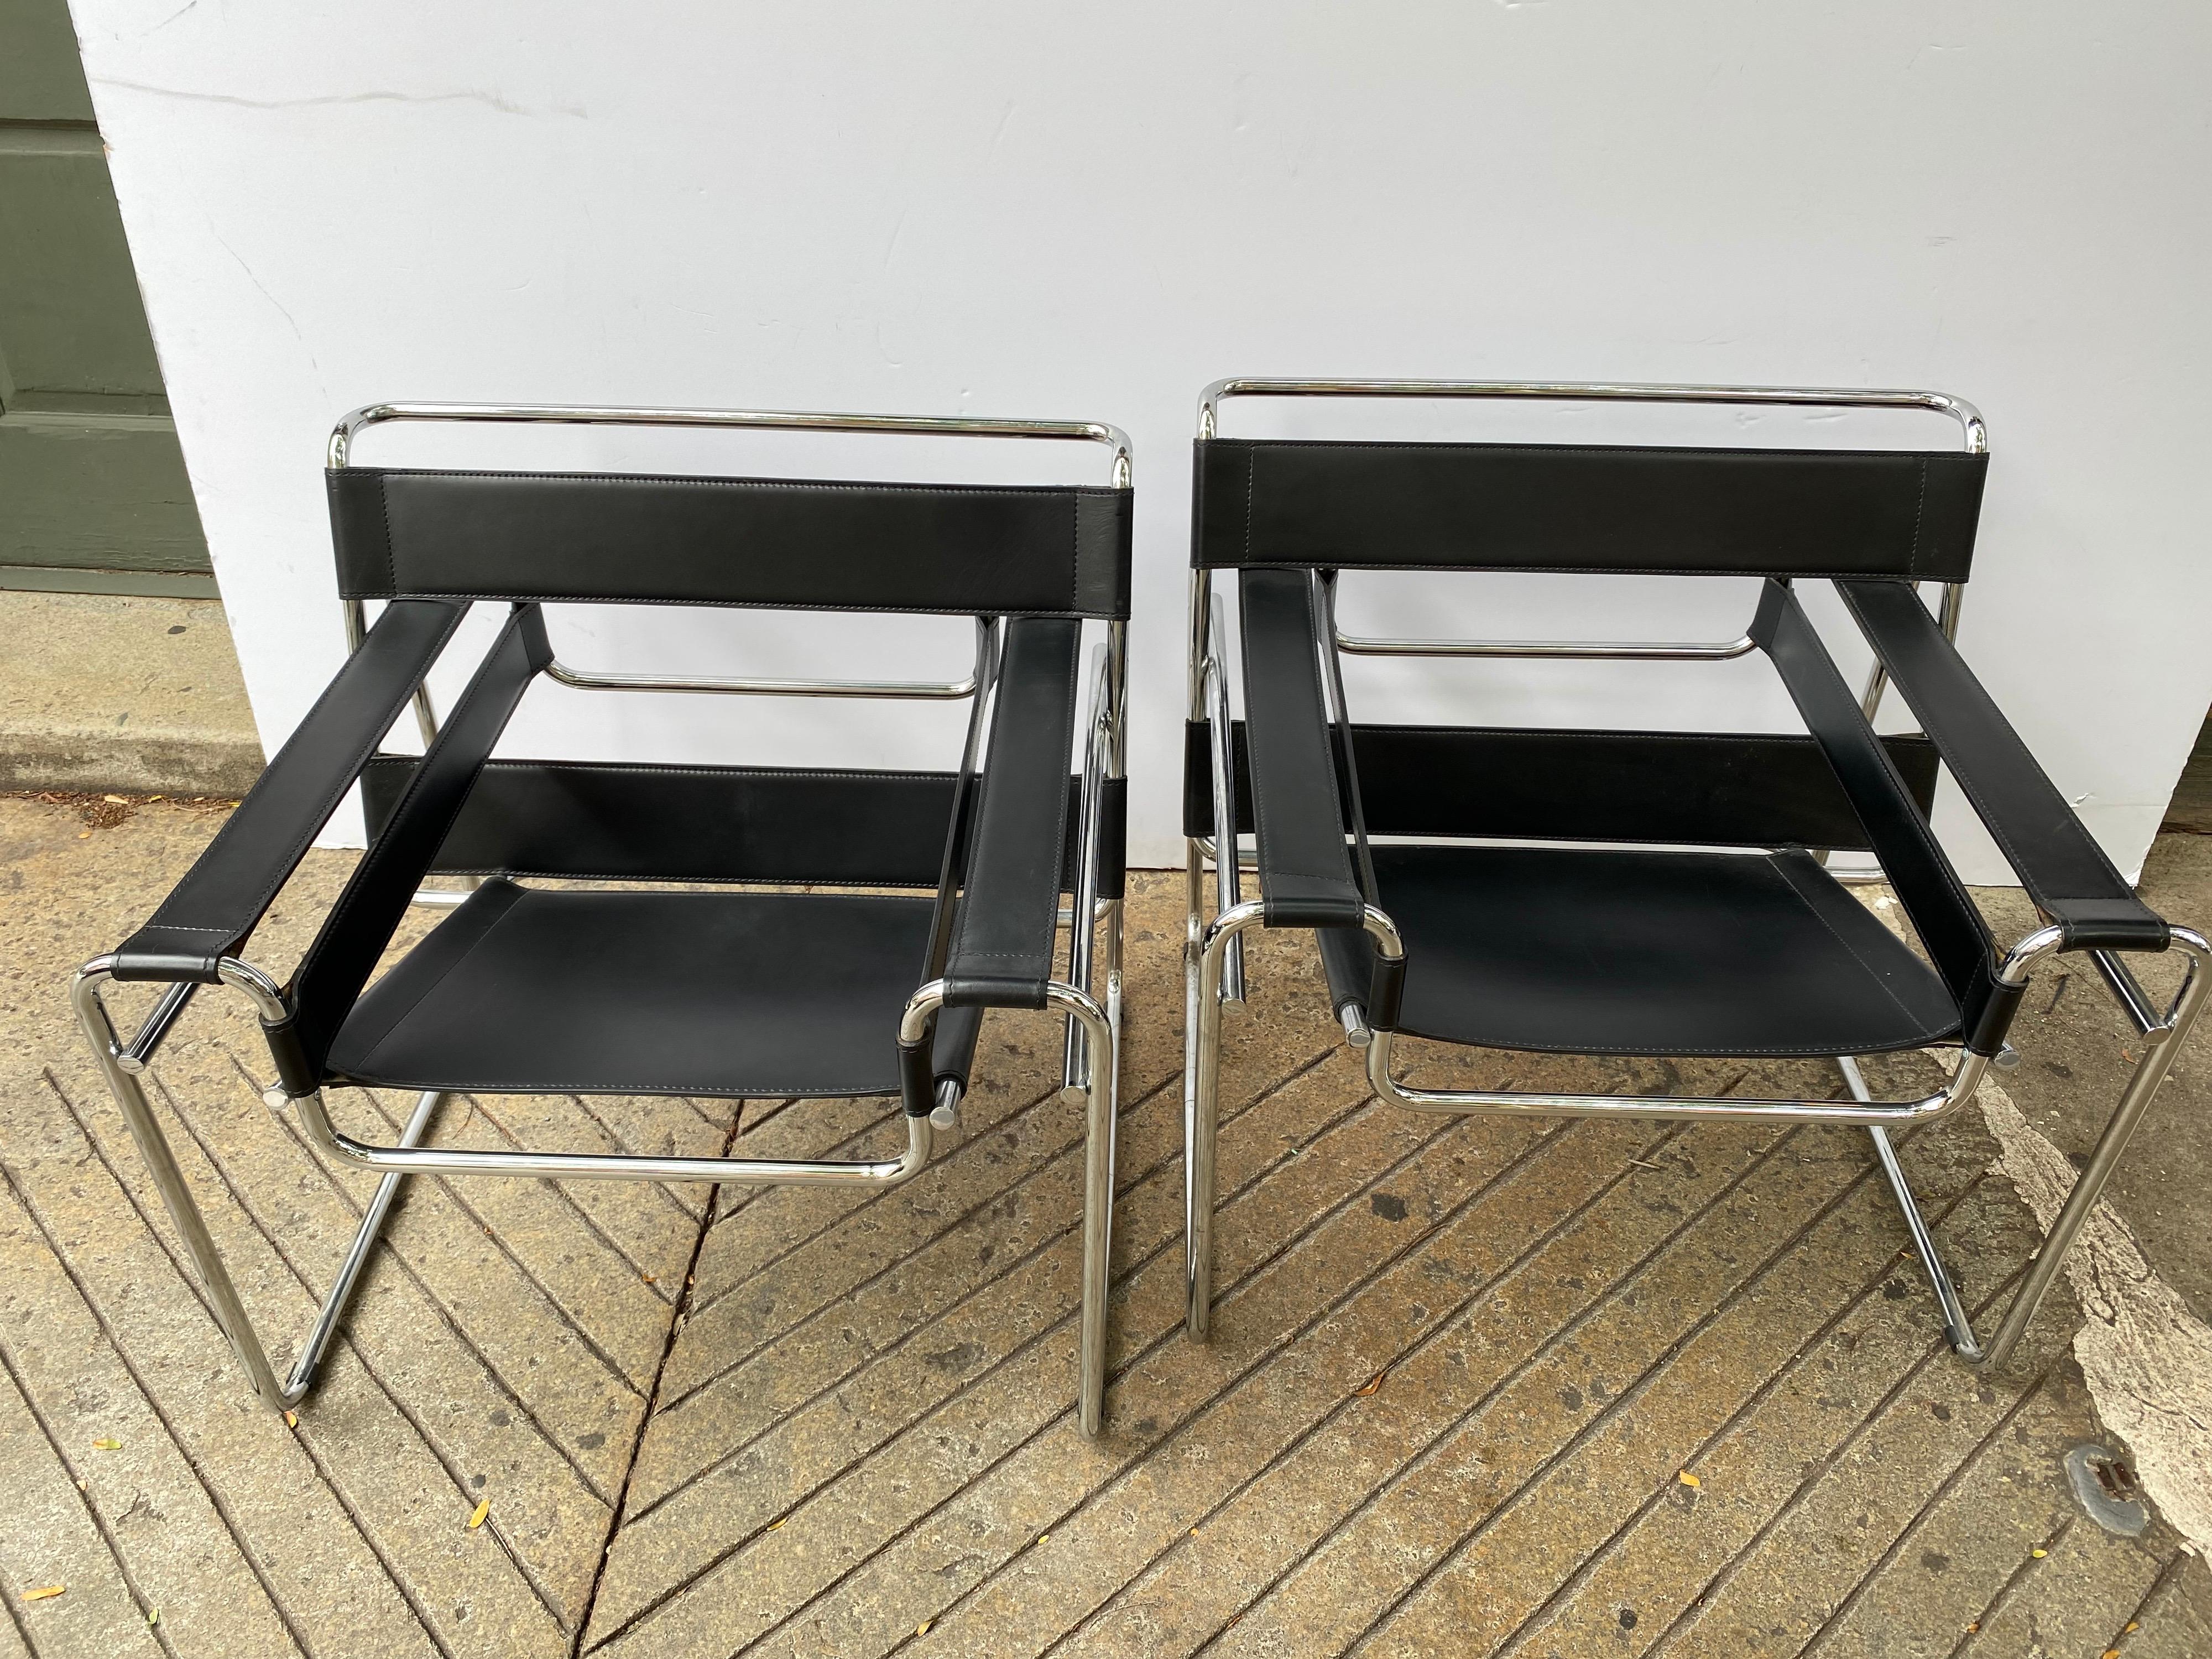 Marcel Breuer Classic 1925 design! chair has been produced off and on since it's creation! Black Leather and Chrome are very Clean! I would date this pair to 2000? Roughly 15-20 years old. Unmarked but nice quality with finished caps and nicer